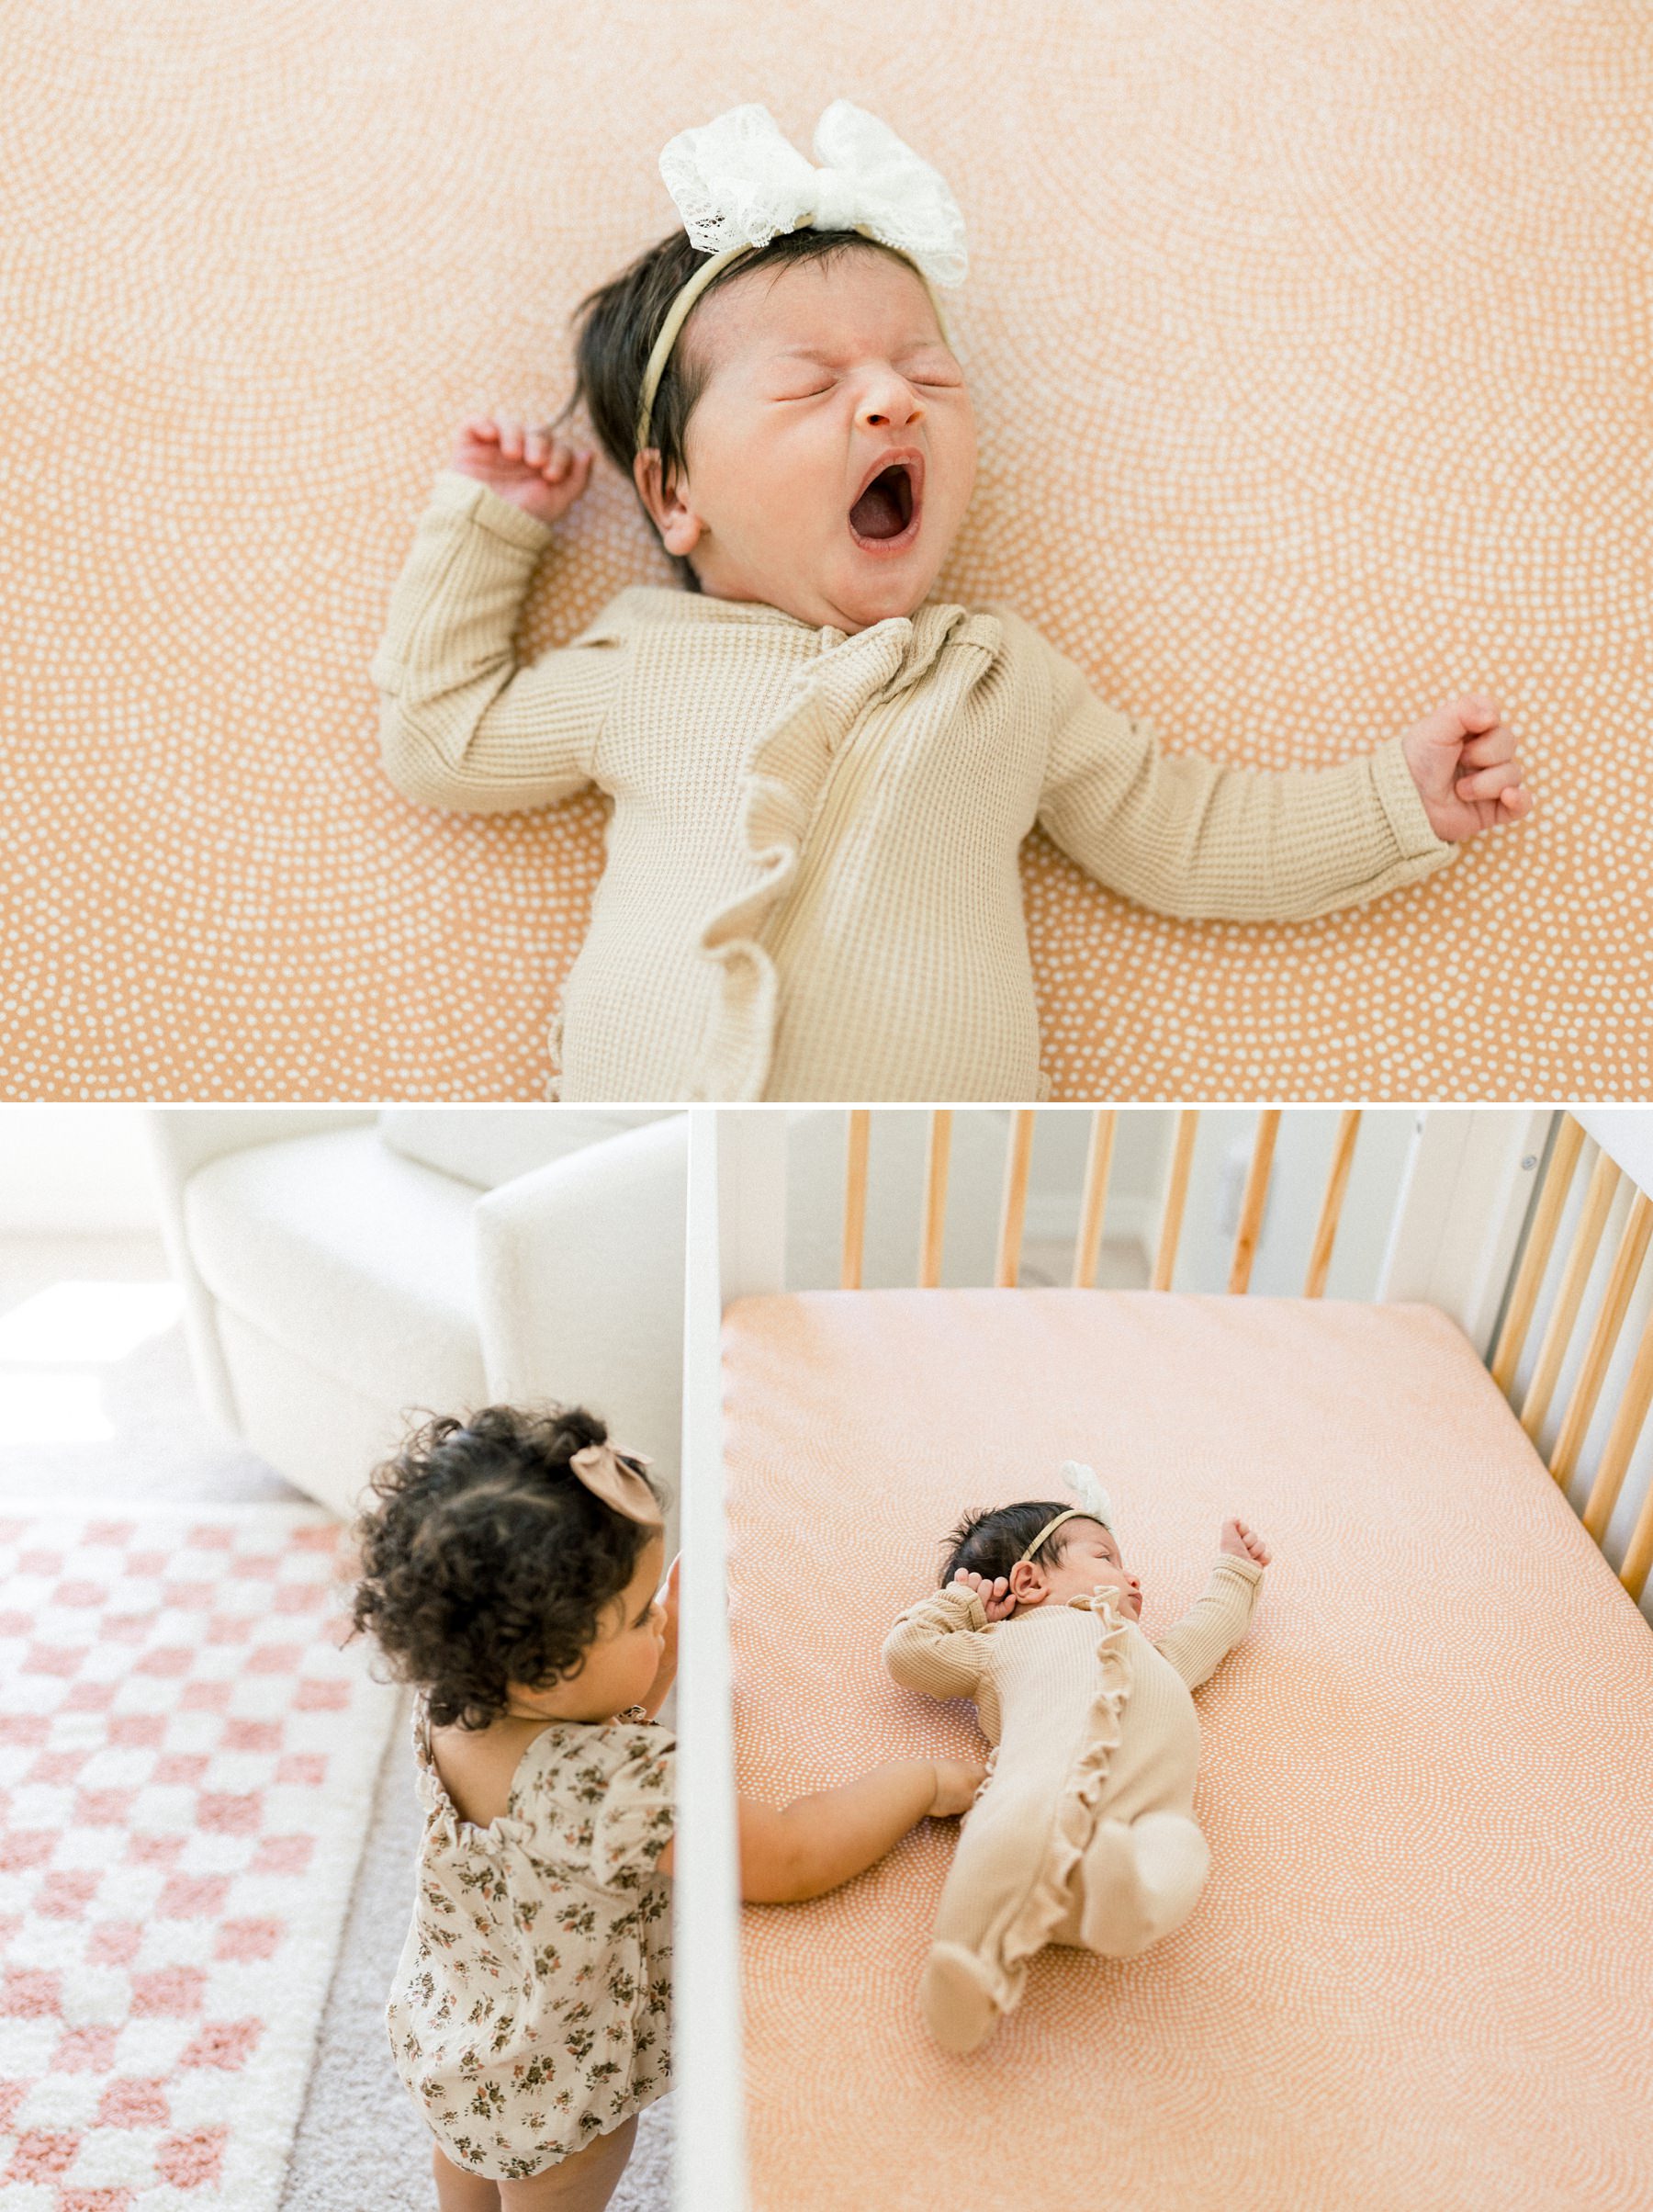 Baby yawning while big sister is reaching for her in the crib